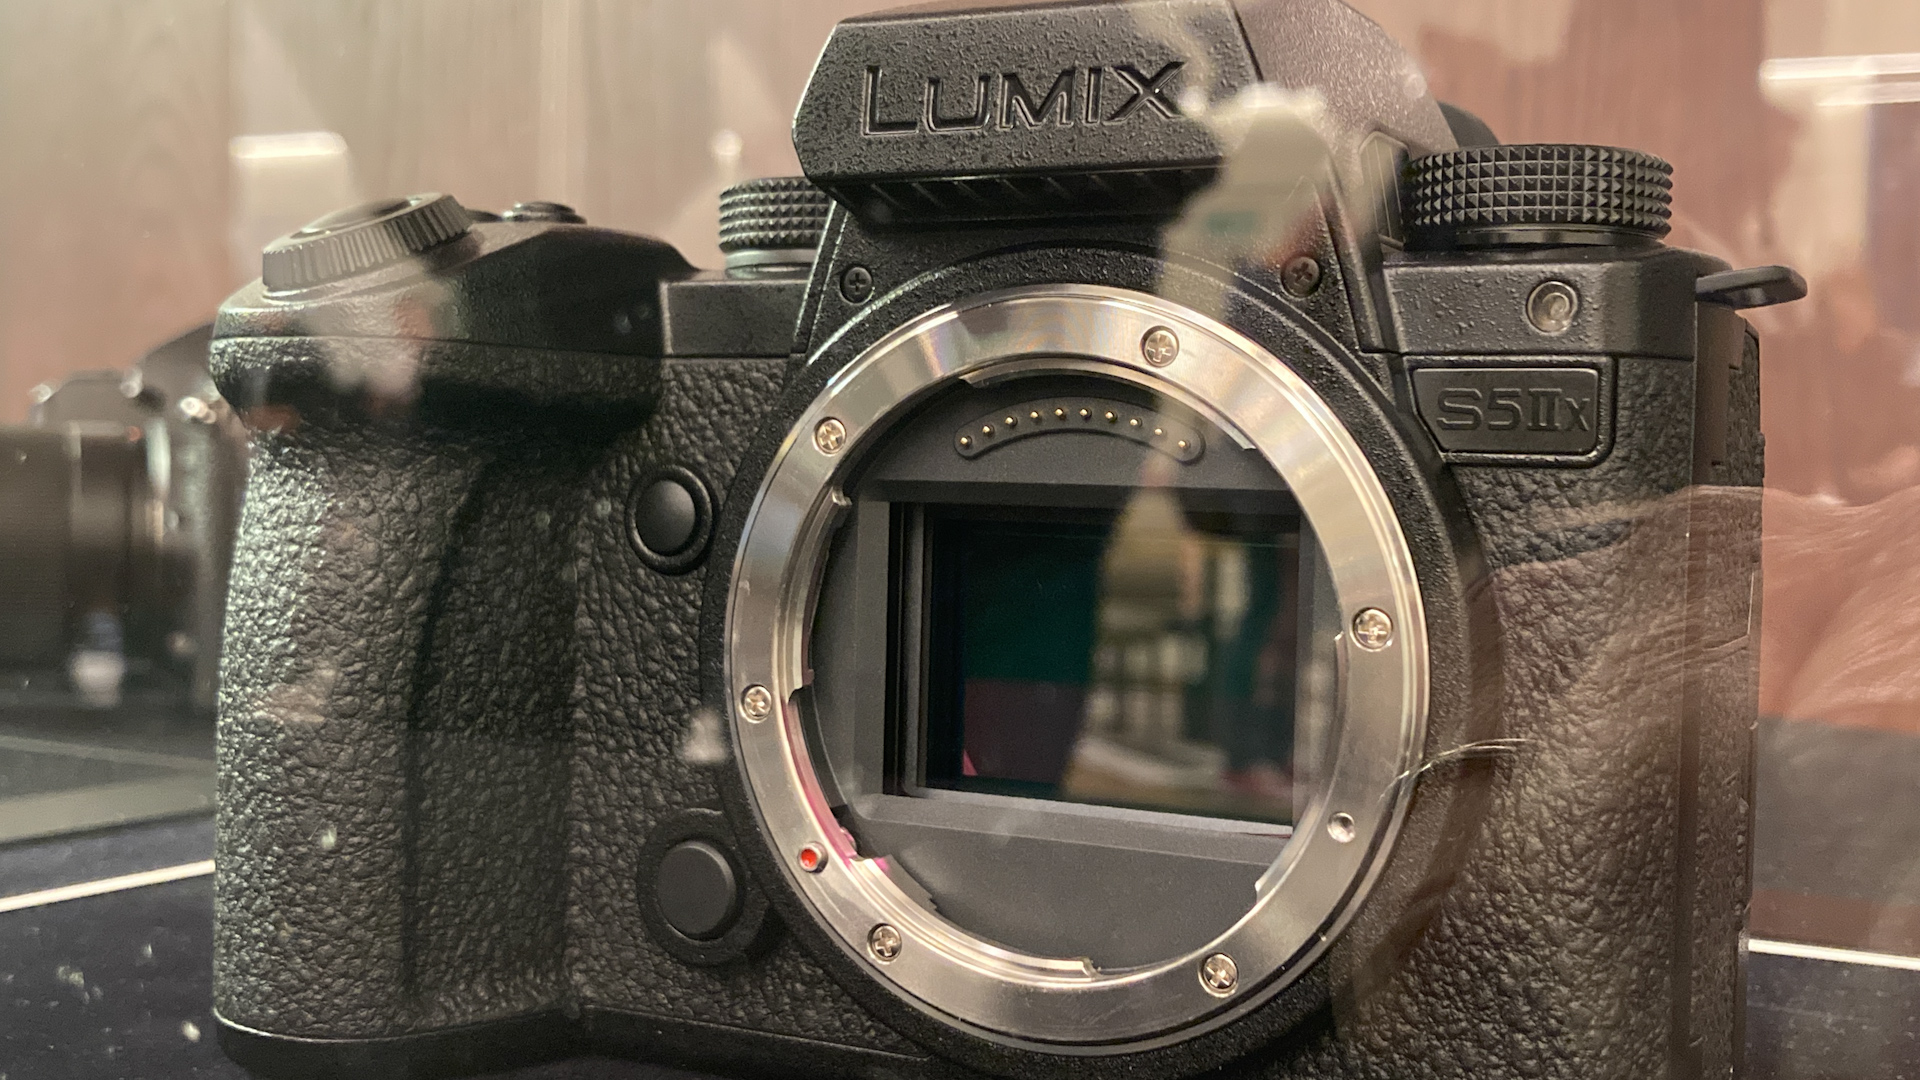 Panasonic Lumix S5 II Just Edged Out Sony & Canon - Hands On Review! 